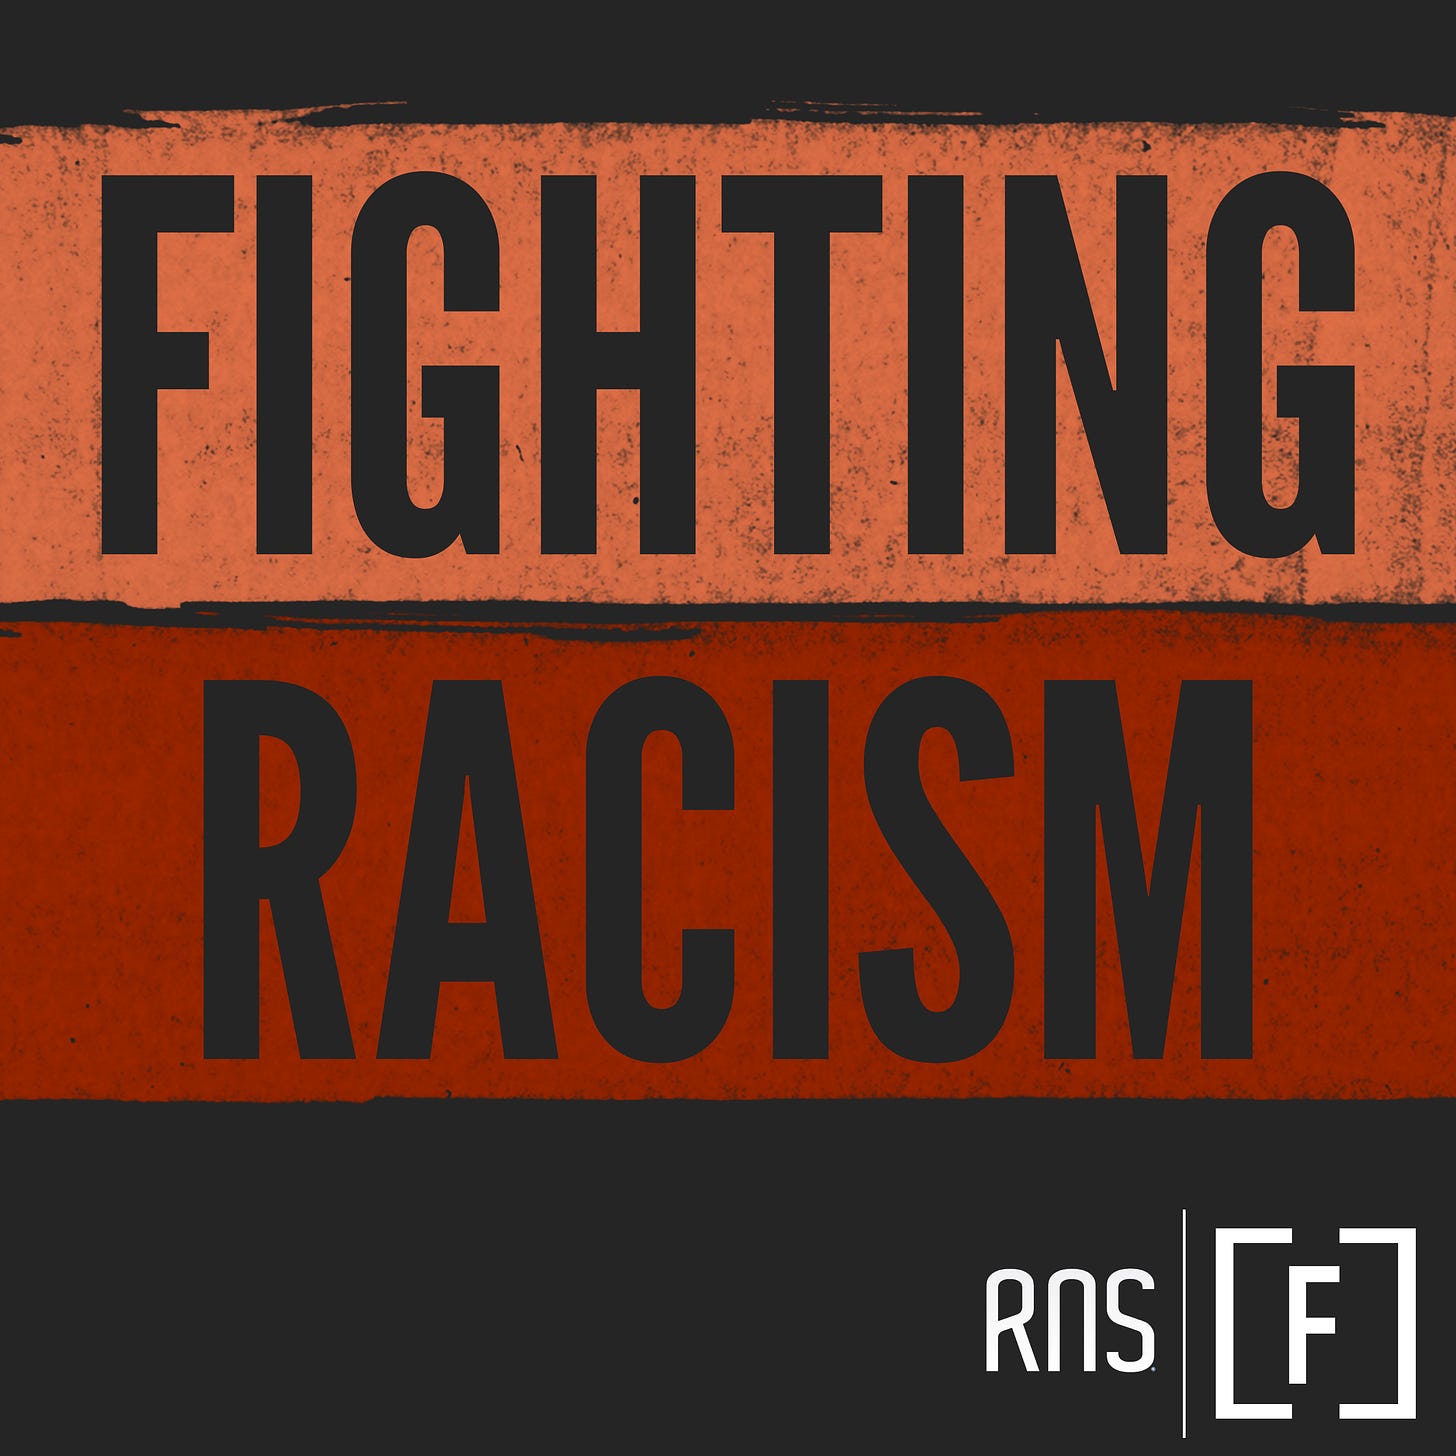 Graphic that says "Fighting Racism"